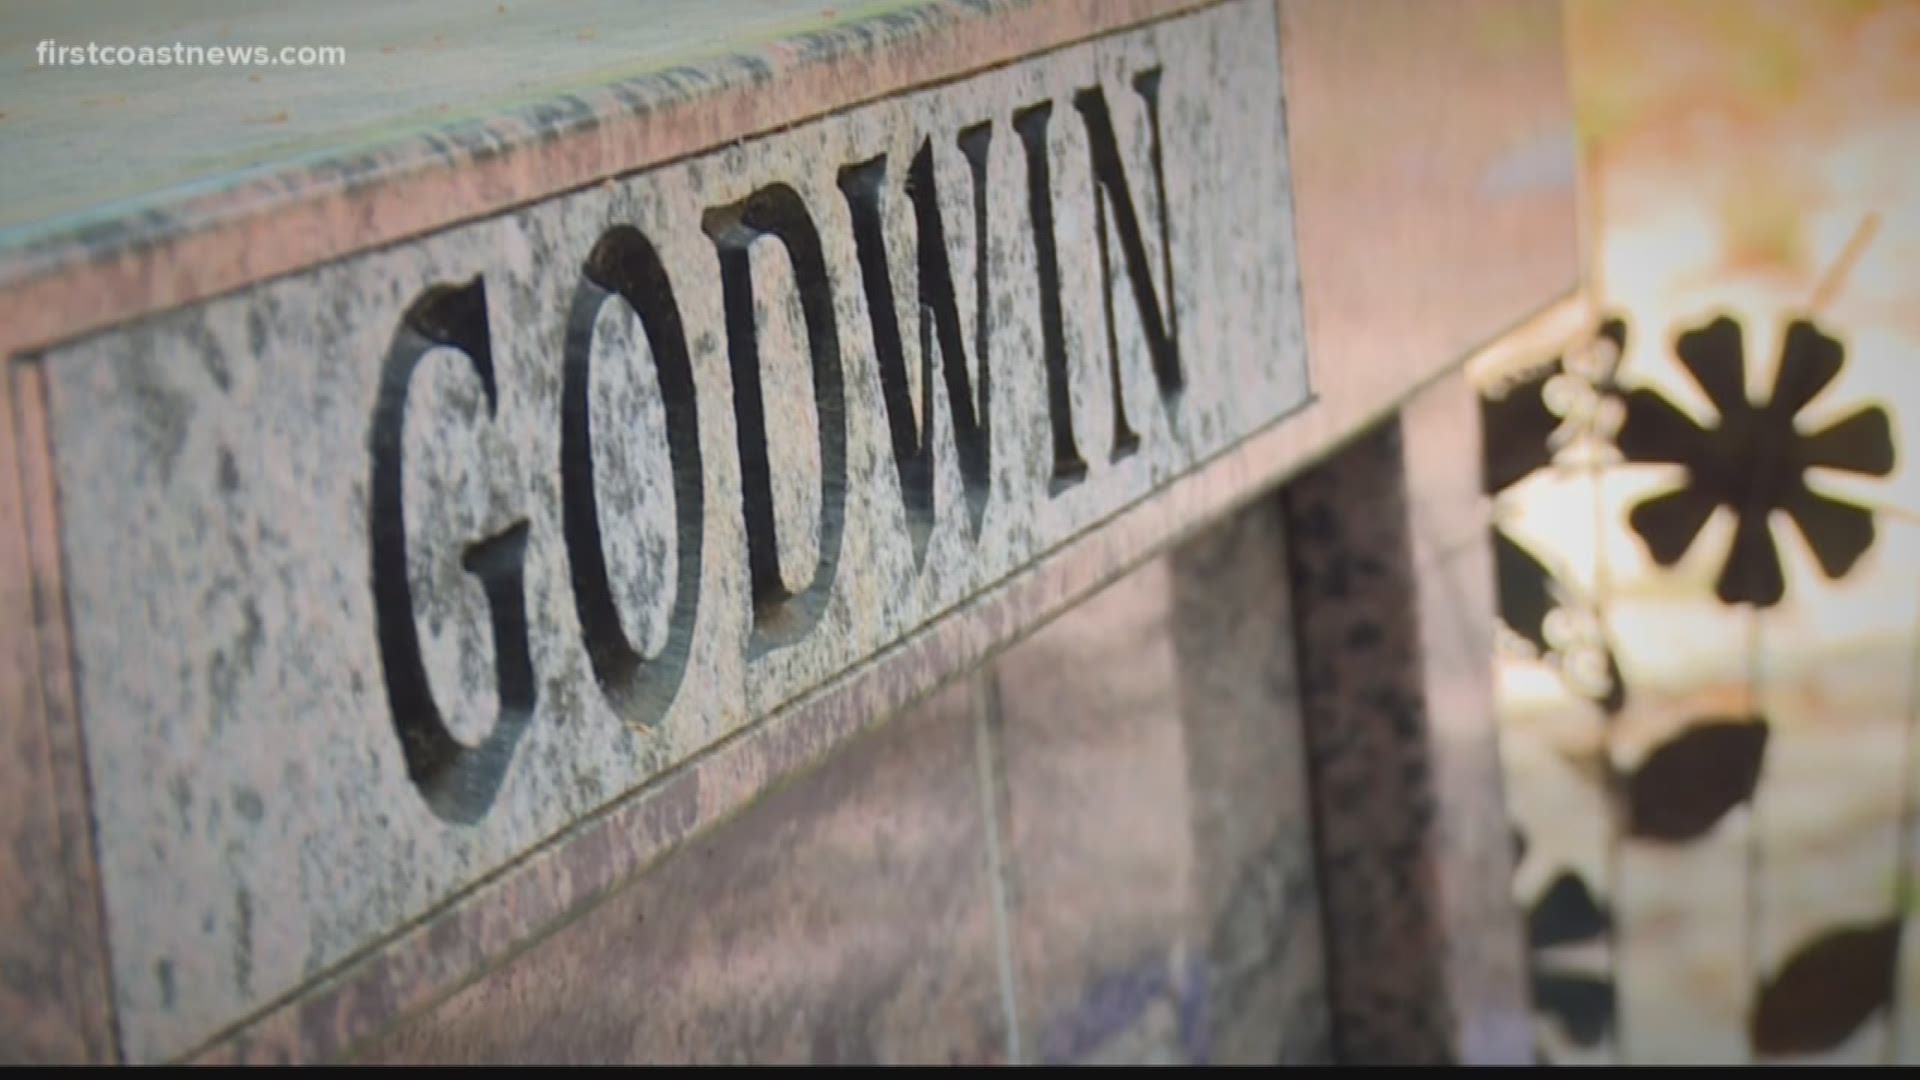 For years the Godwin family have had their doubts, and two years ago they had the mausoleum opened, to place his son's ashes there, and discovered his sister's ashes missing.